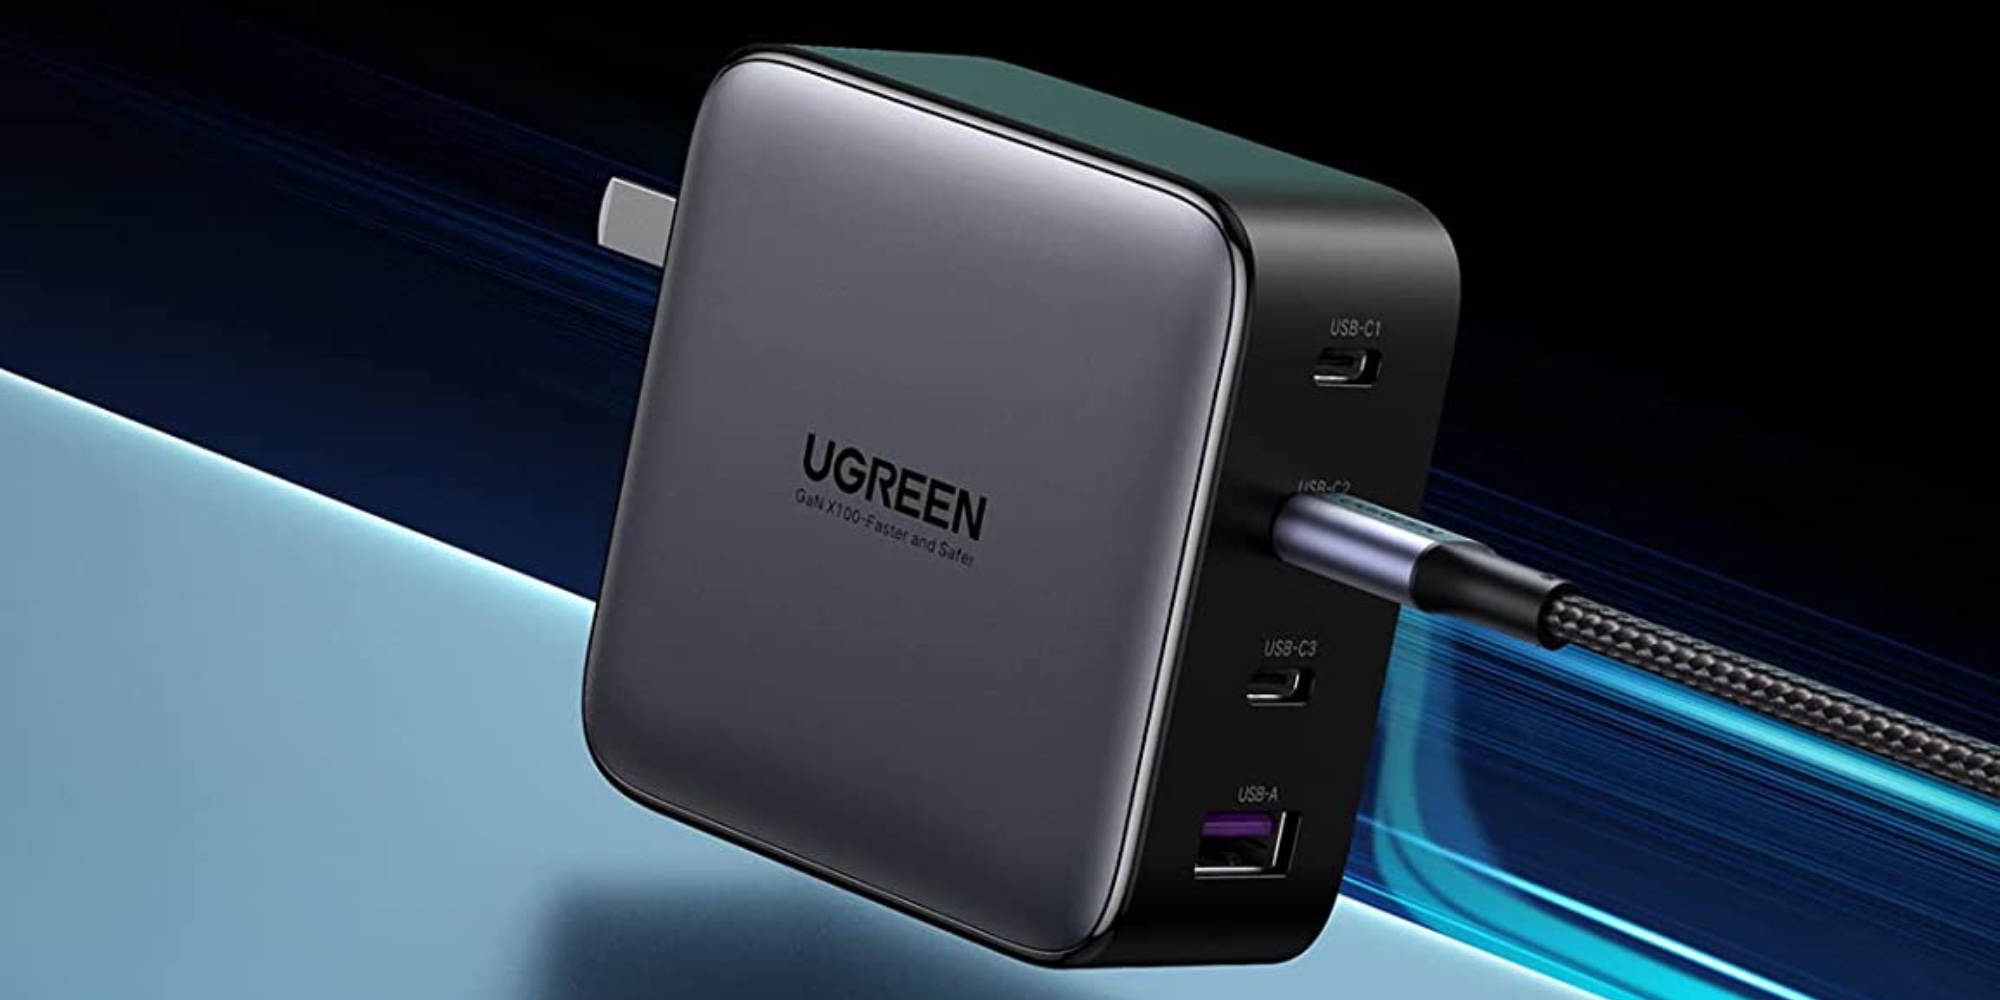 Ugreen 100W GaN Mini with 15W Wireless MagSafe Charger – UGREEN